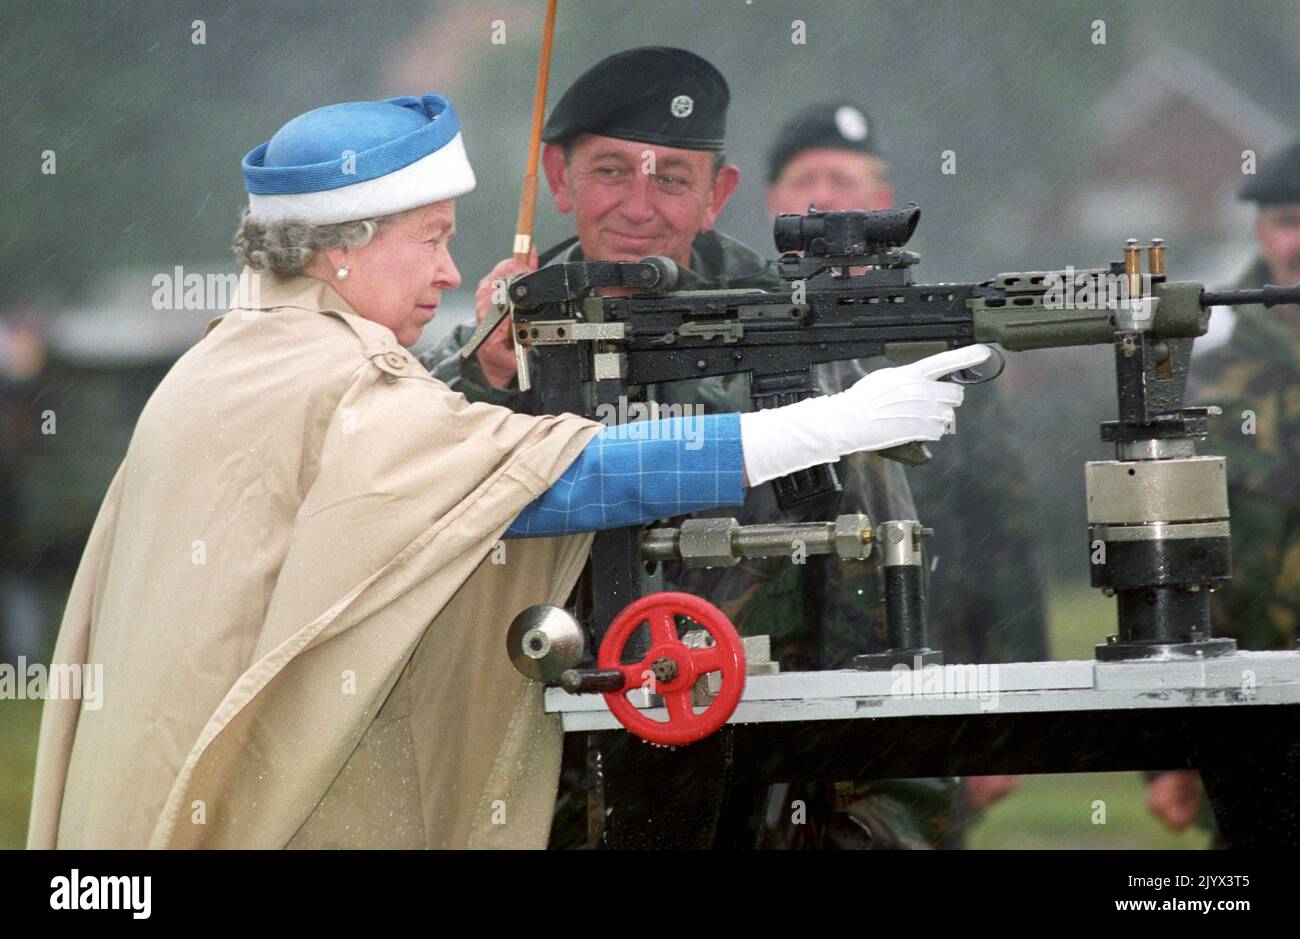 File photo dated 09/07/93 of Queen Elizabeth II, with Chief Instructor, Small Arms Corp LT Col George Harvey, firing the last shot on a standard SA 80 rifle when she attended the centenary of the Army Rifle Association at Bisley. The Queen died peacefully at Balmoral this afternoon, Buckingham Palace has announced. Issue date: Thursday September 8, 2022. Stock Photo